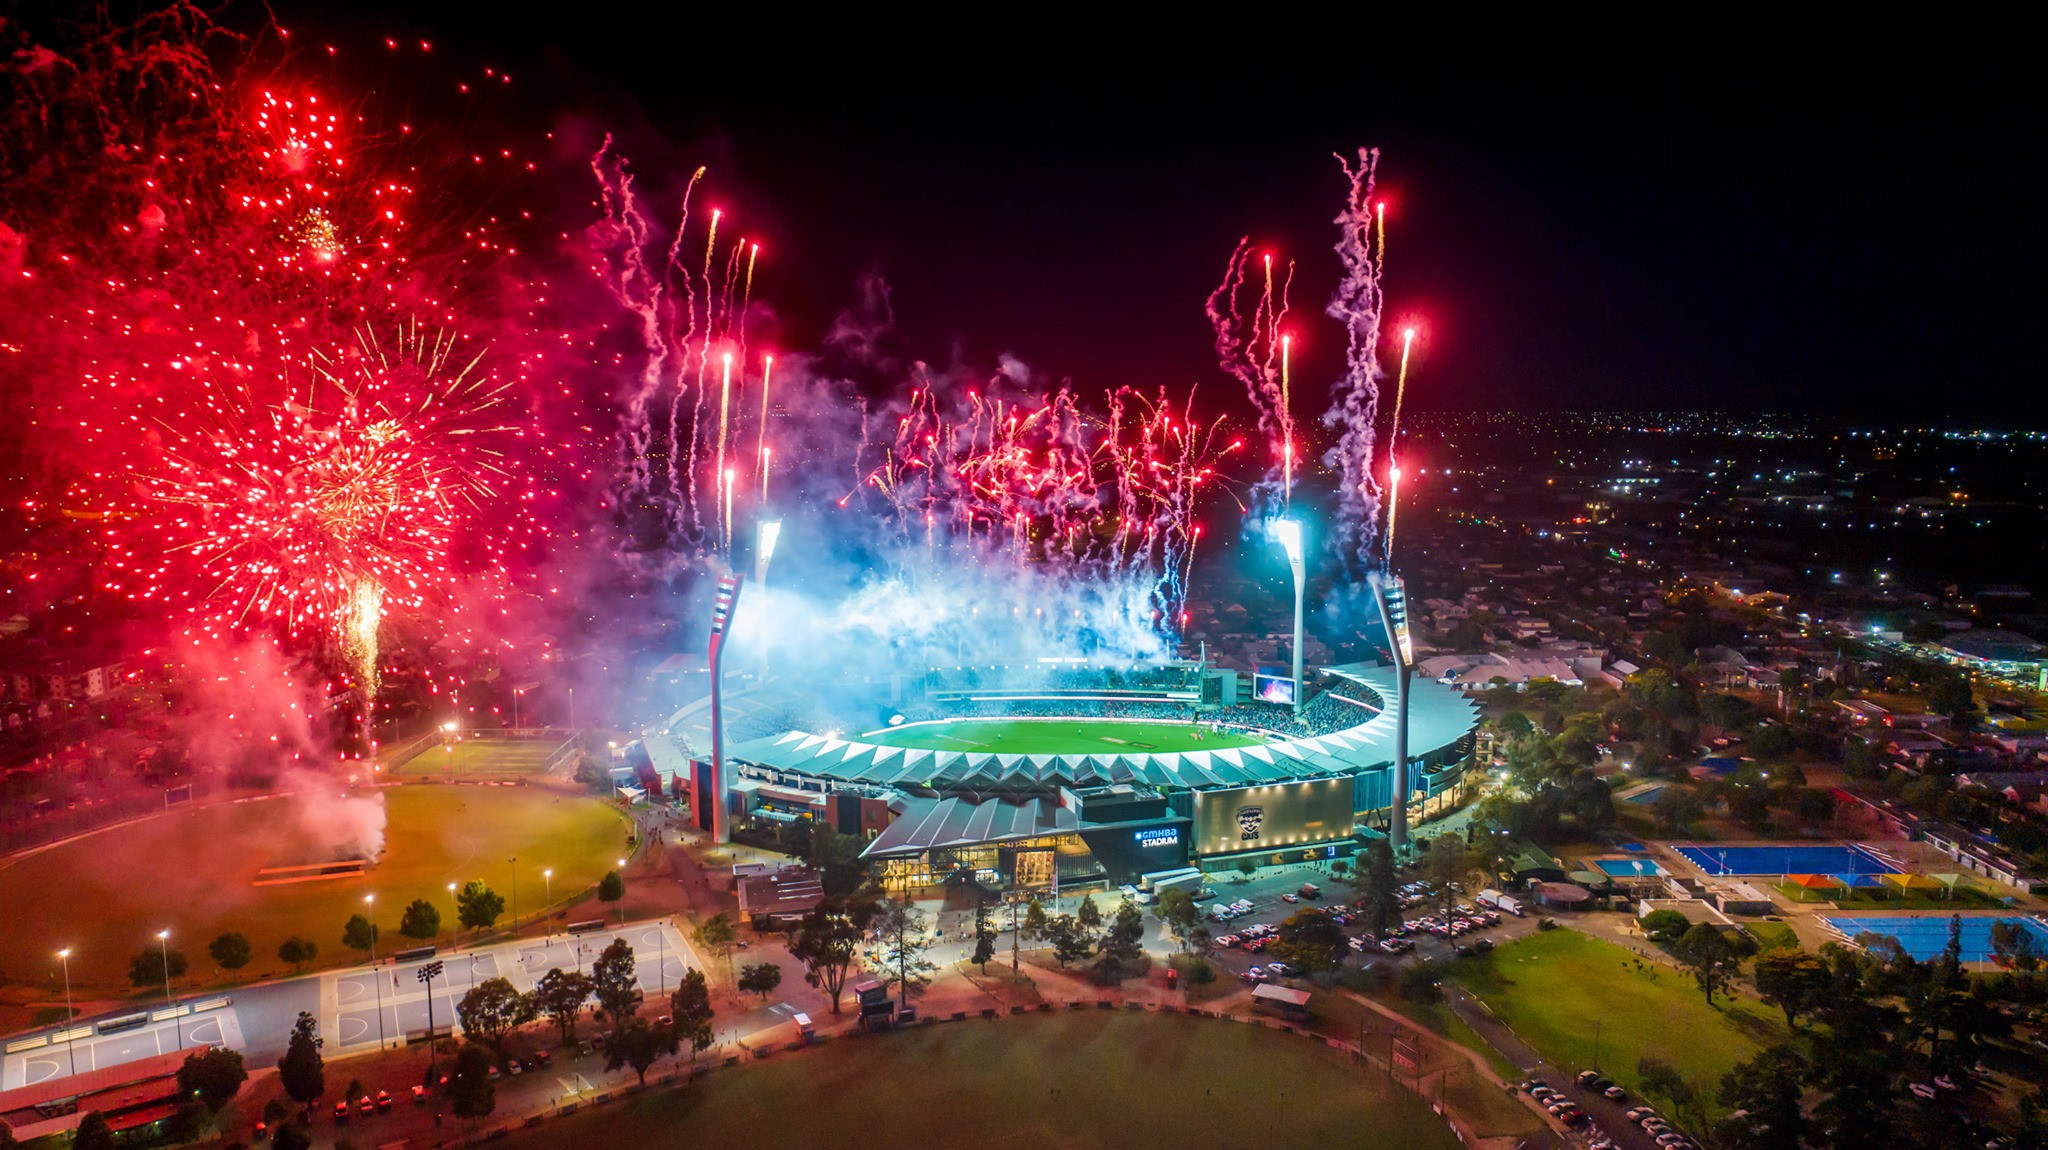 Kardinia Park in Geelong is set to be the venue for the Closing Ceremony in 2026 ©Victoria 2026